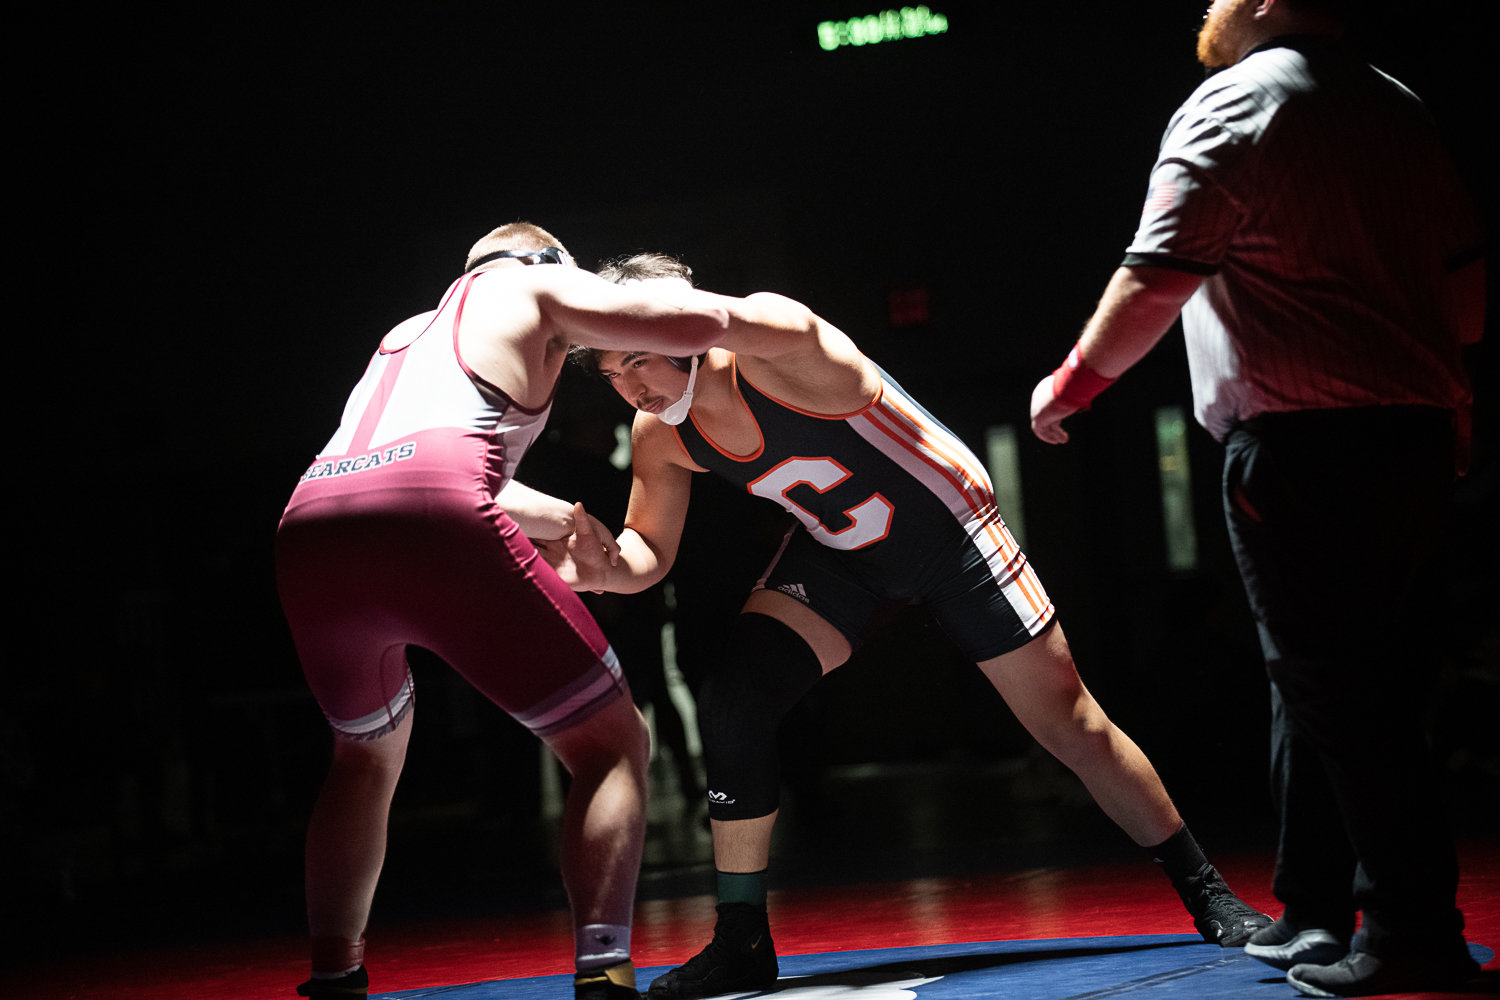 Centralia's Eriberto Mojica grapples with W.F. West's Andrew Penland during the 220-pound finals at the 2A Evergreen Sub-Regional Tournament at Black Hills on Feb. 4.